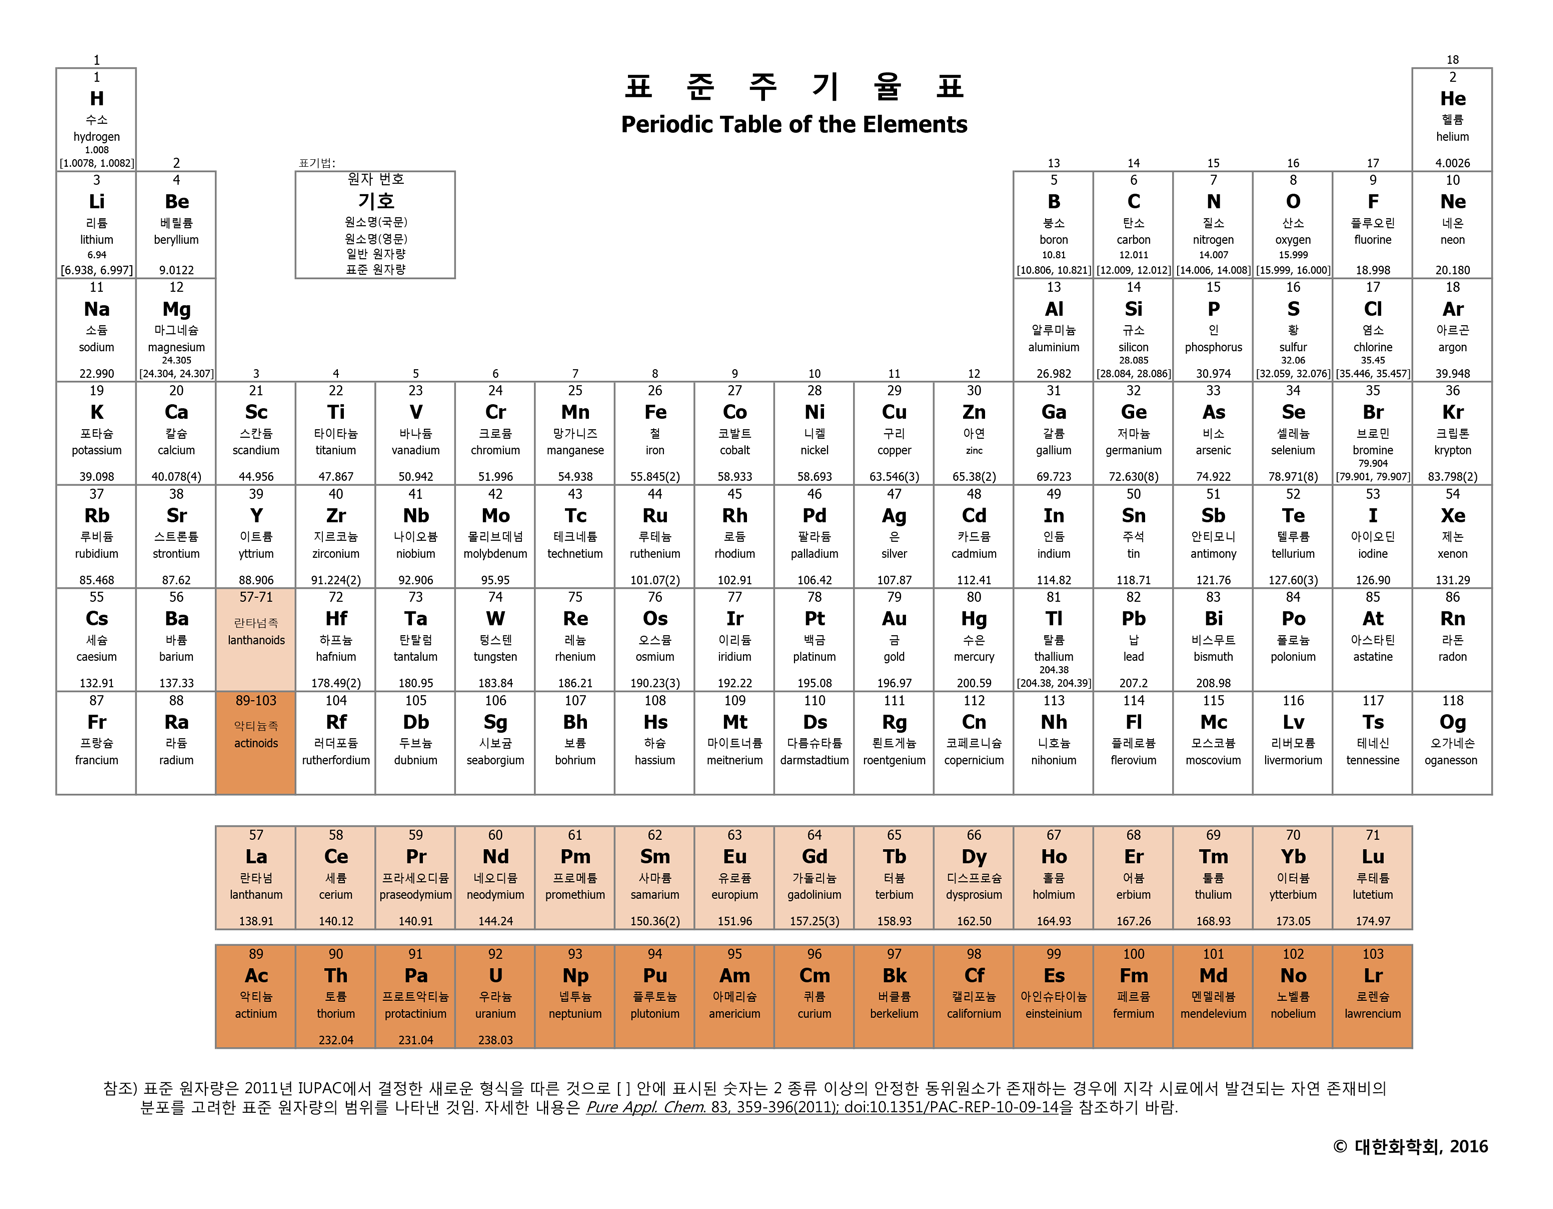 https://new.kcsnet.or.kr/kcs/cheminfo/periodic_table_of_the_elements_kor_eng_20170203.png